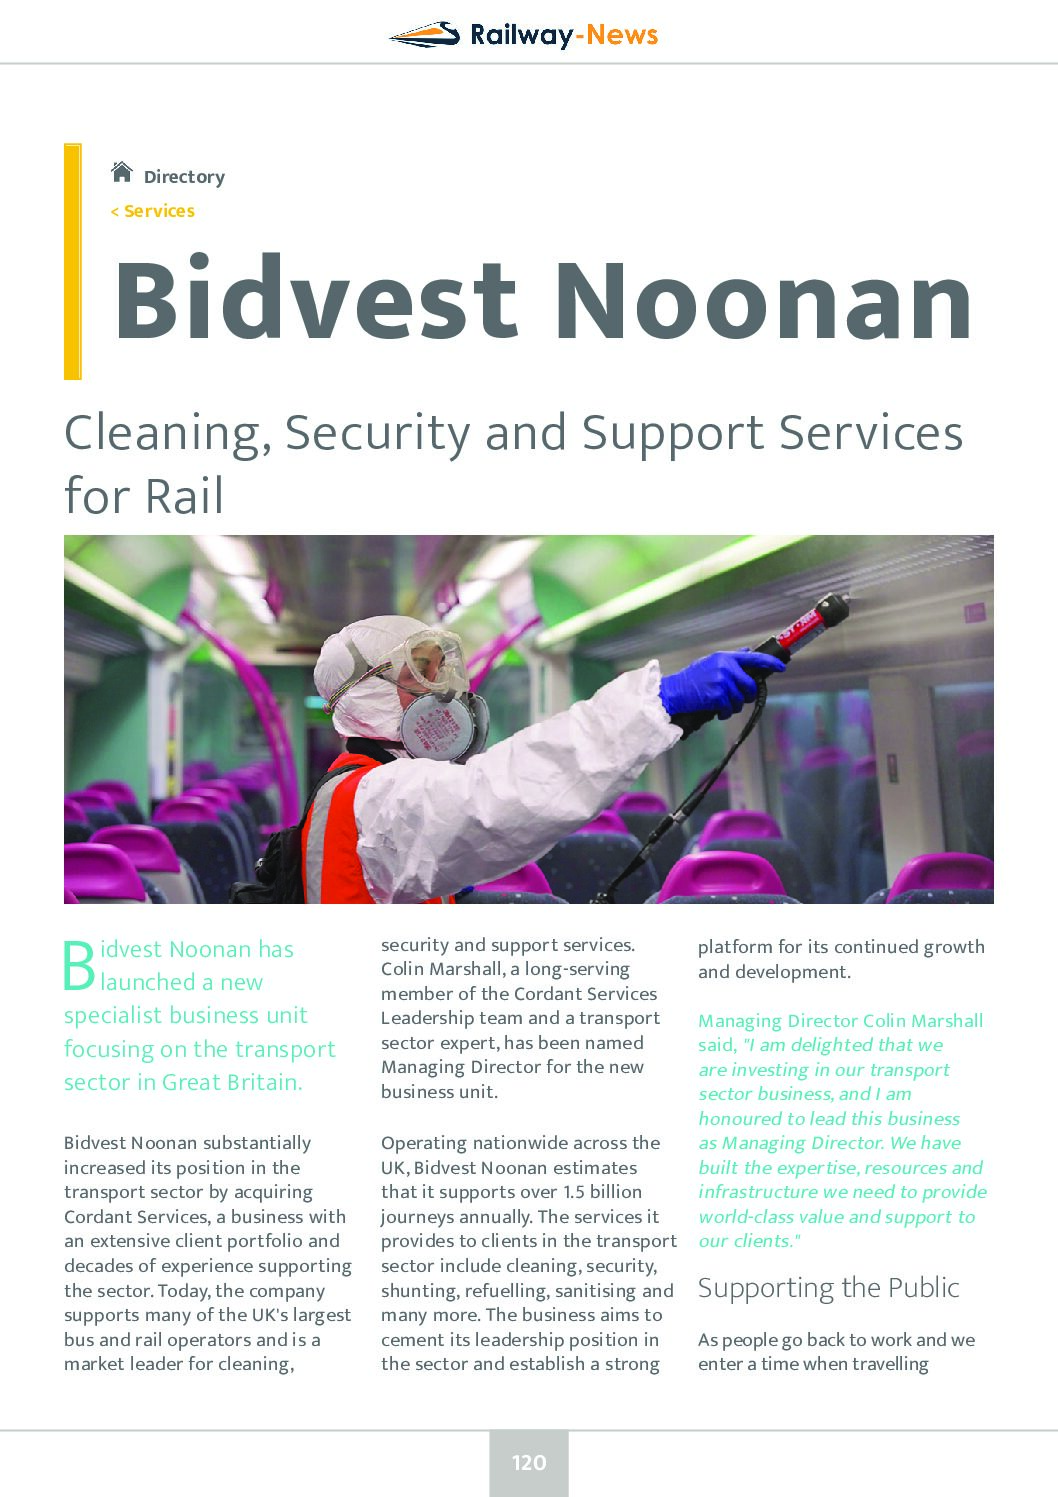 Cleaning, Security and Support Services for Rail